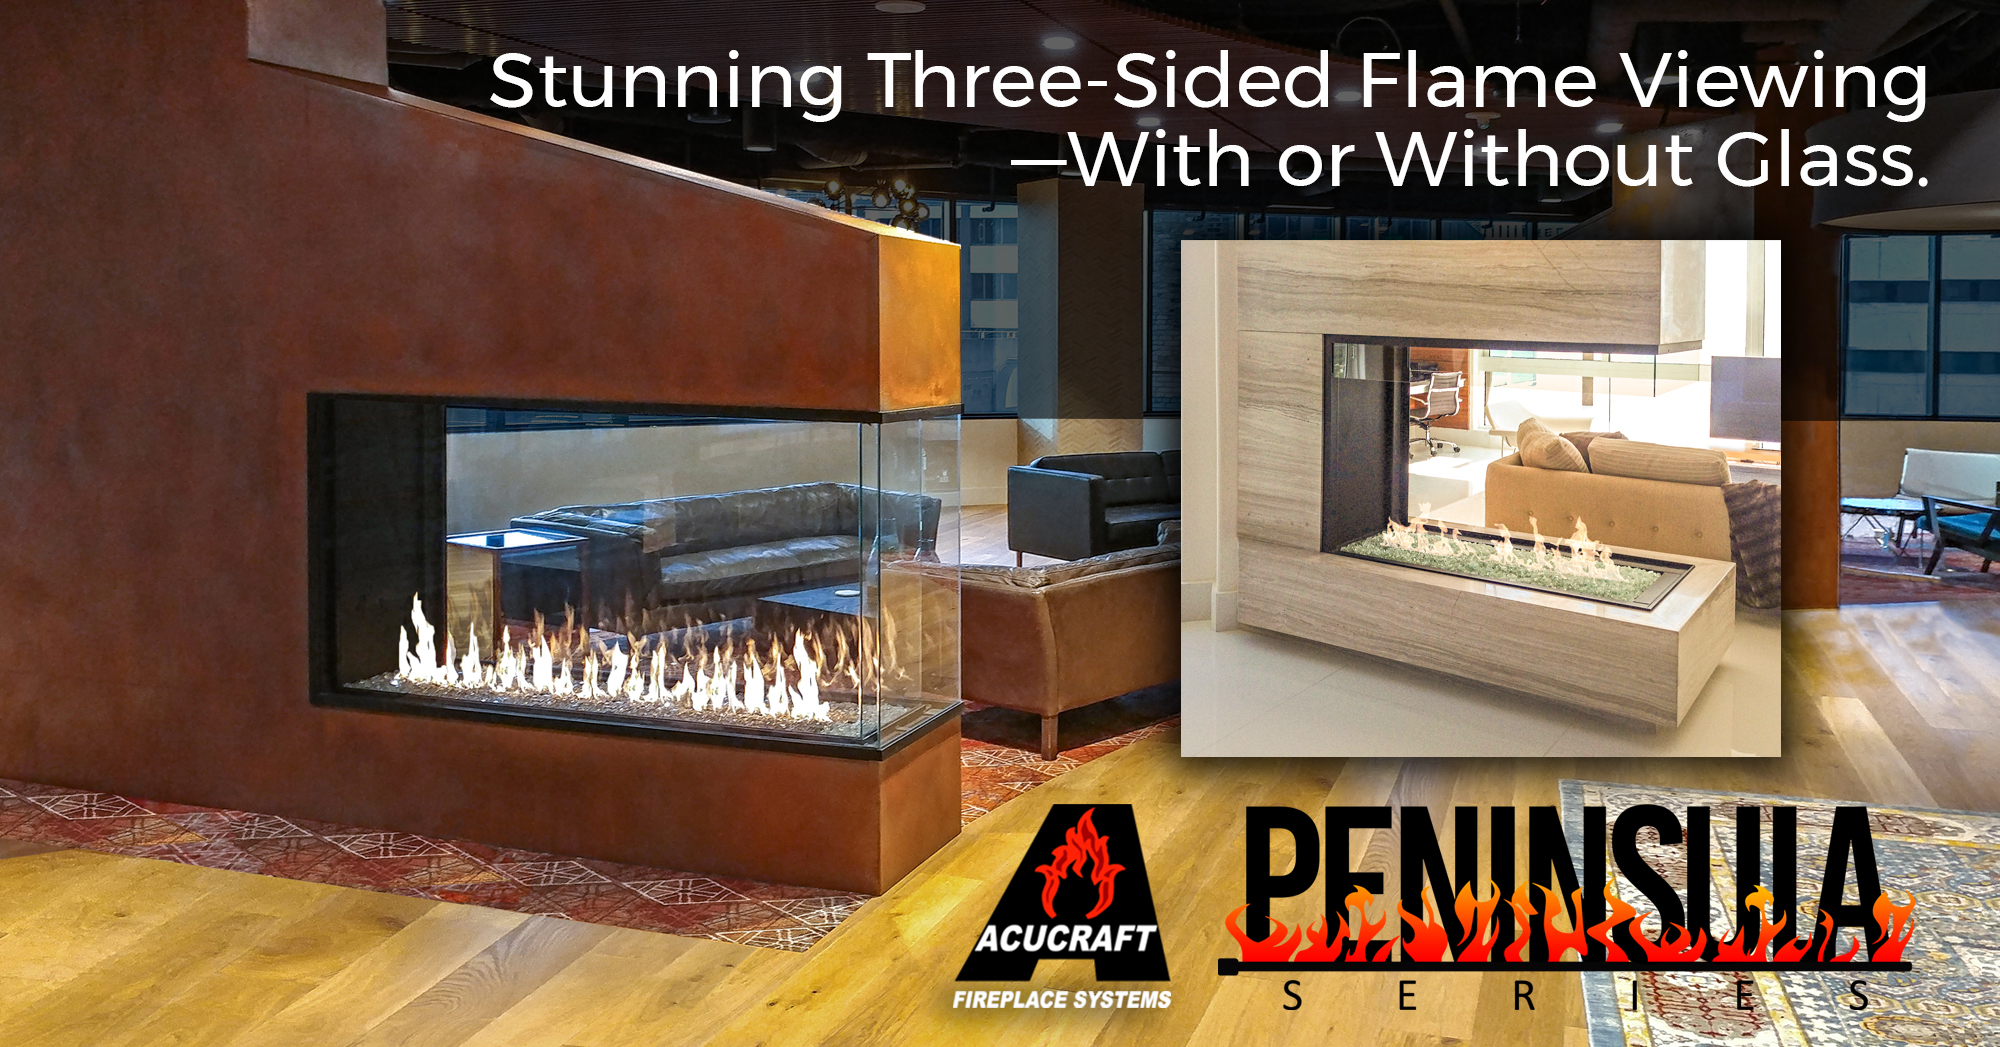 Stunning Three-Sided Flame Viewing With Glass or Open Flame Without Glass